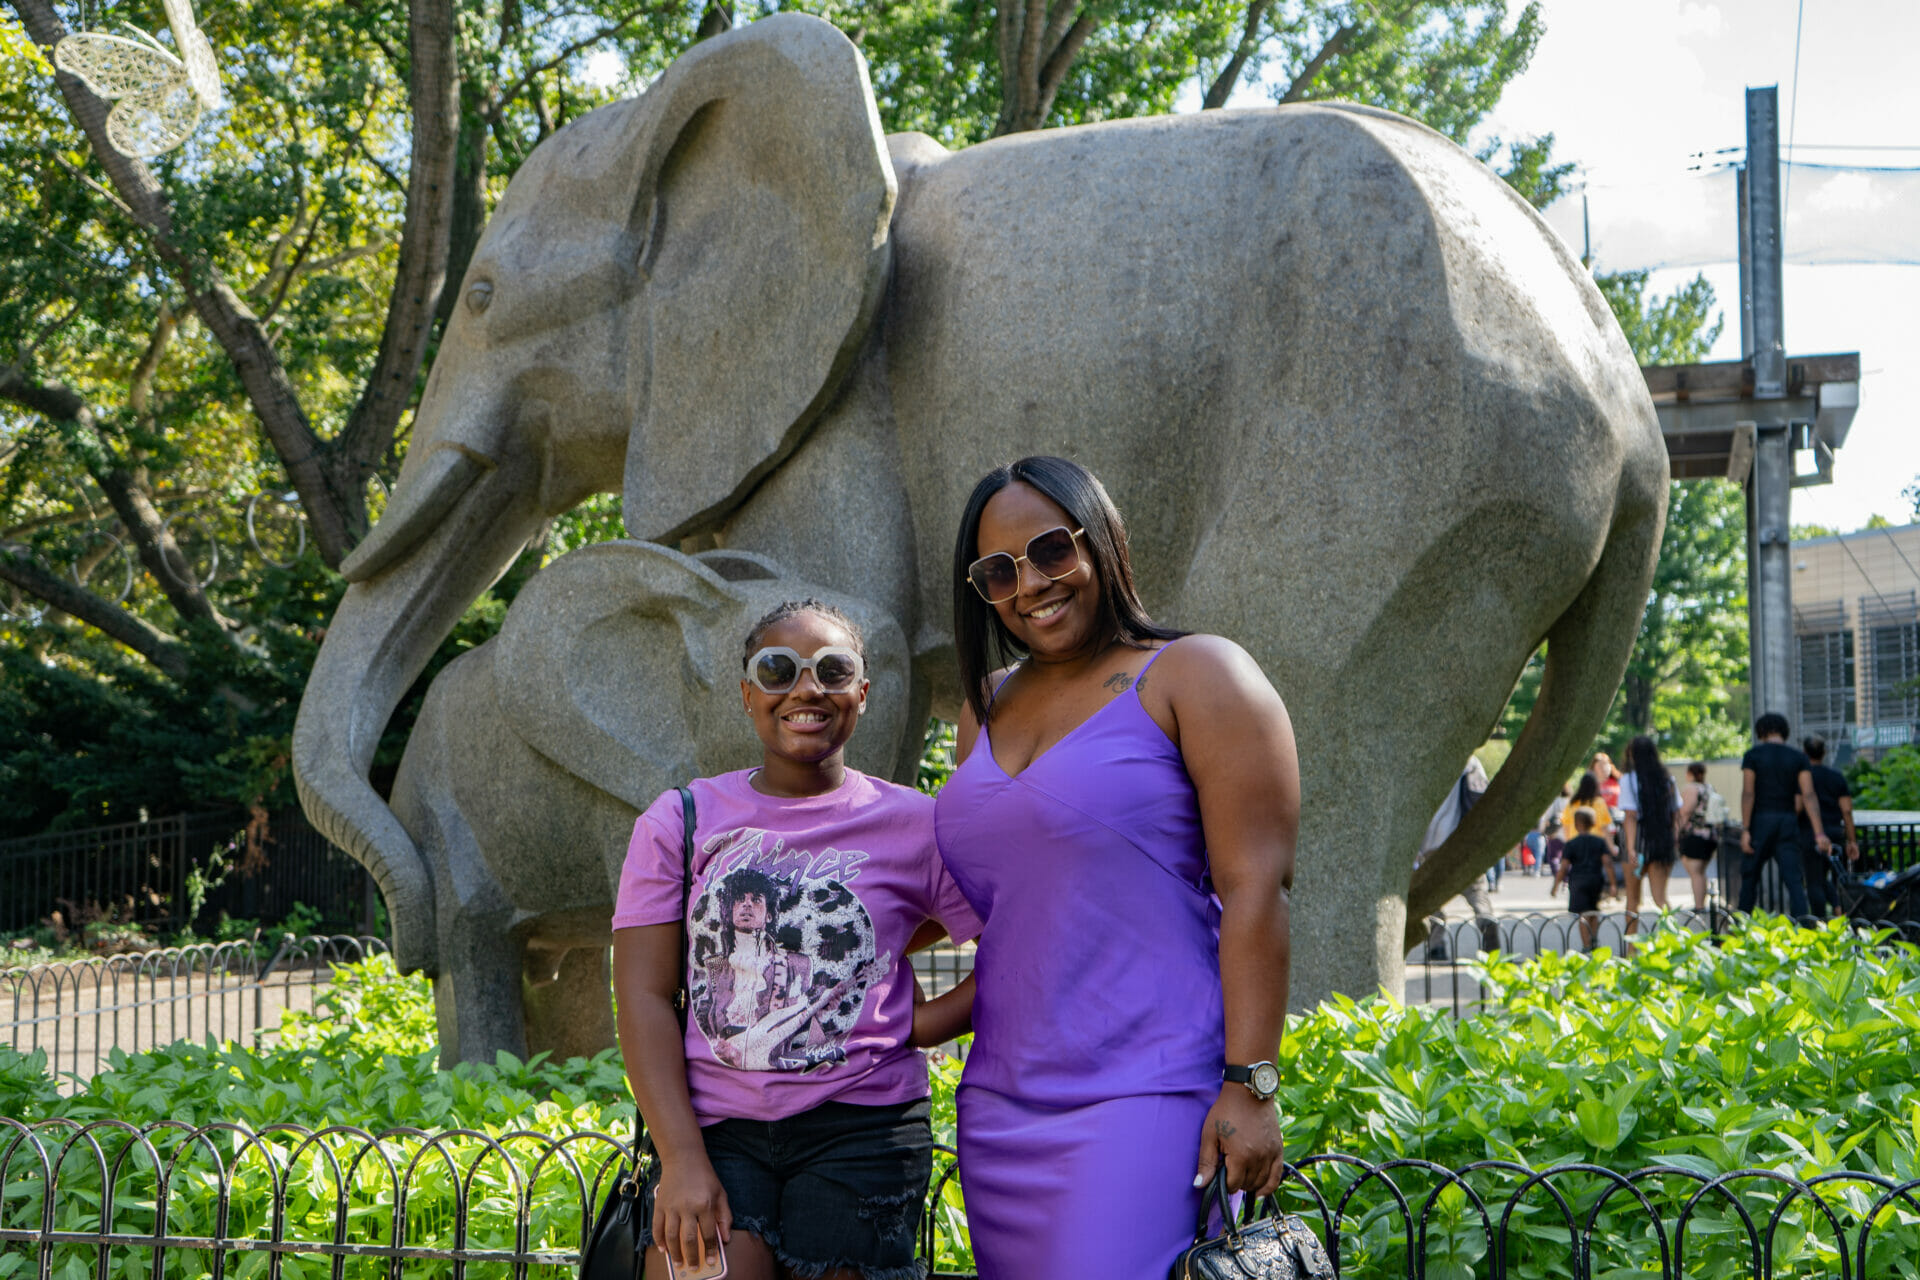 Two Philadelphia Zoo members stand in front of the iconic elephant statue located near the front gate.